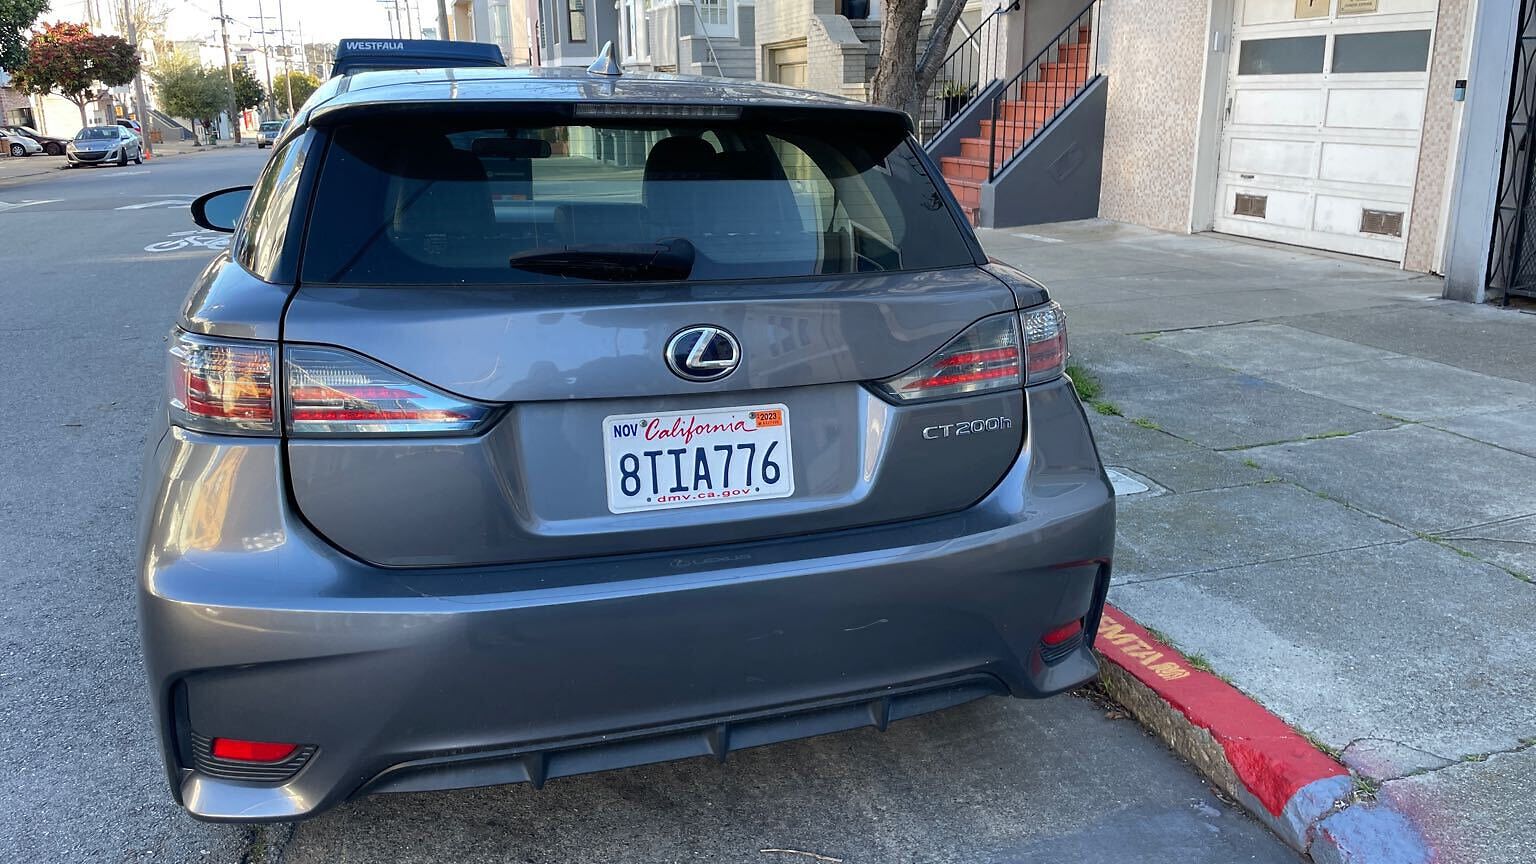 Photo of car in the street with license plate 8TIA776 in California